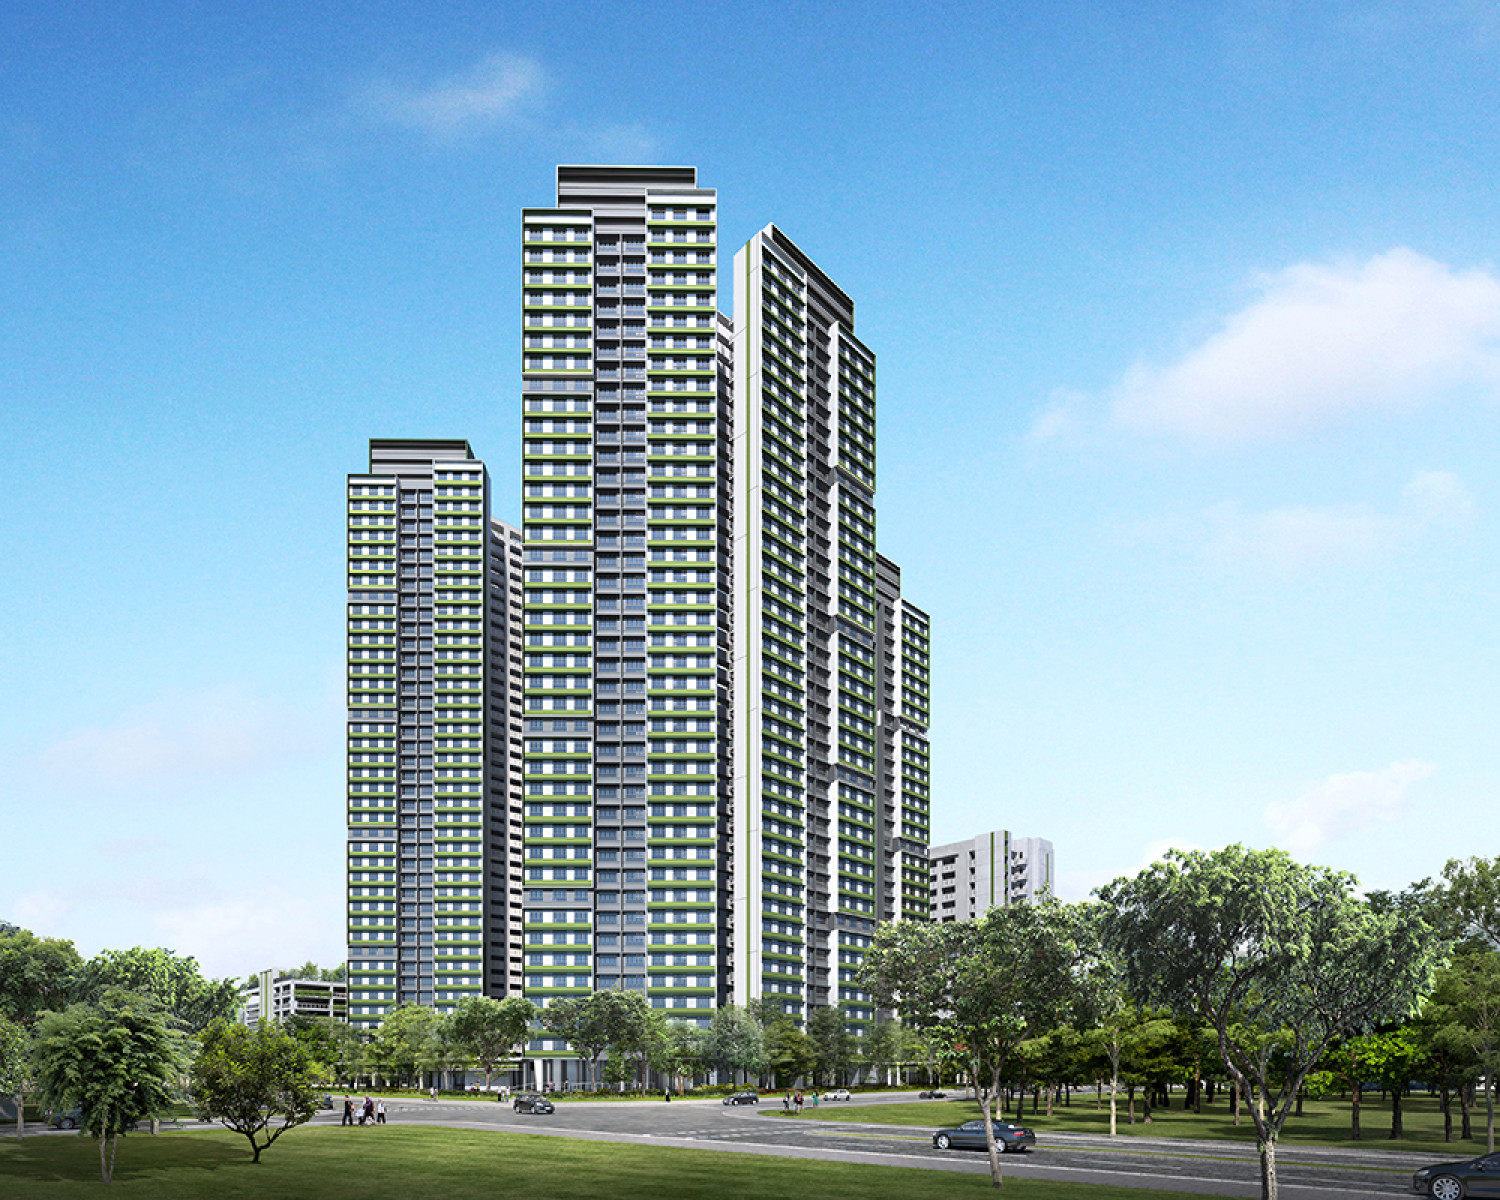 New PLH projects in Bukit Merah and Queenstown under May BTO exercise - Property News